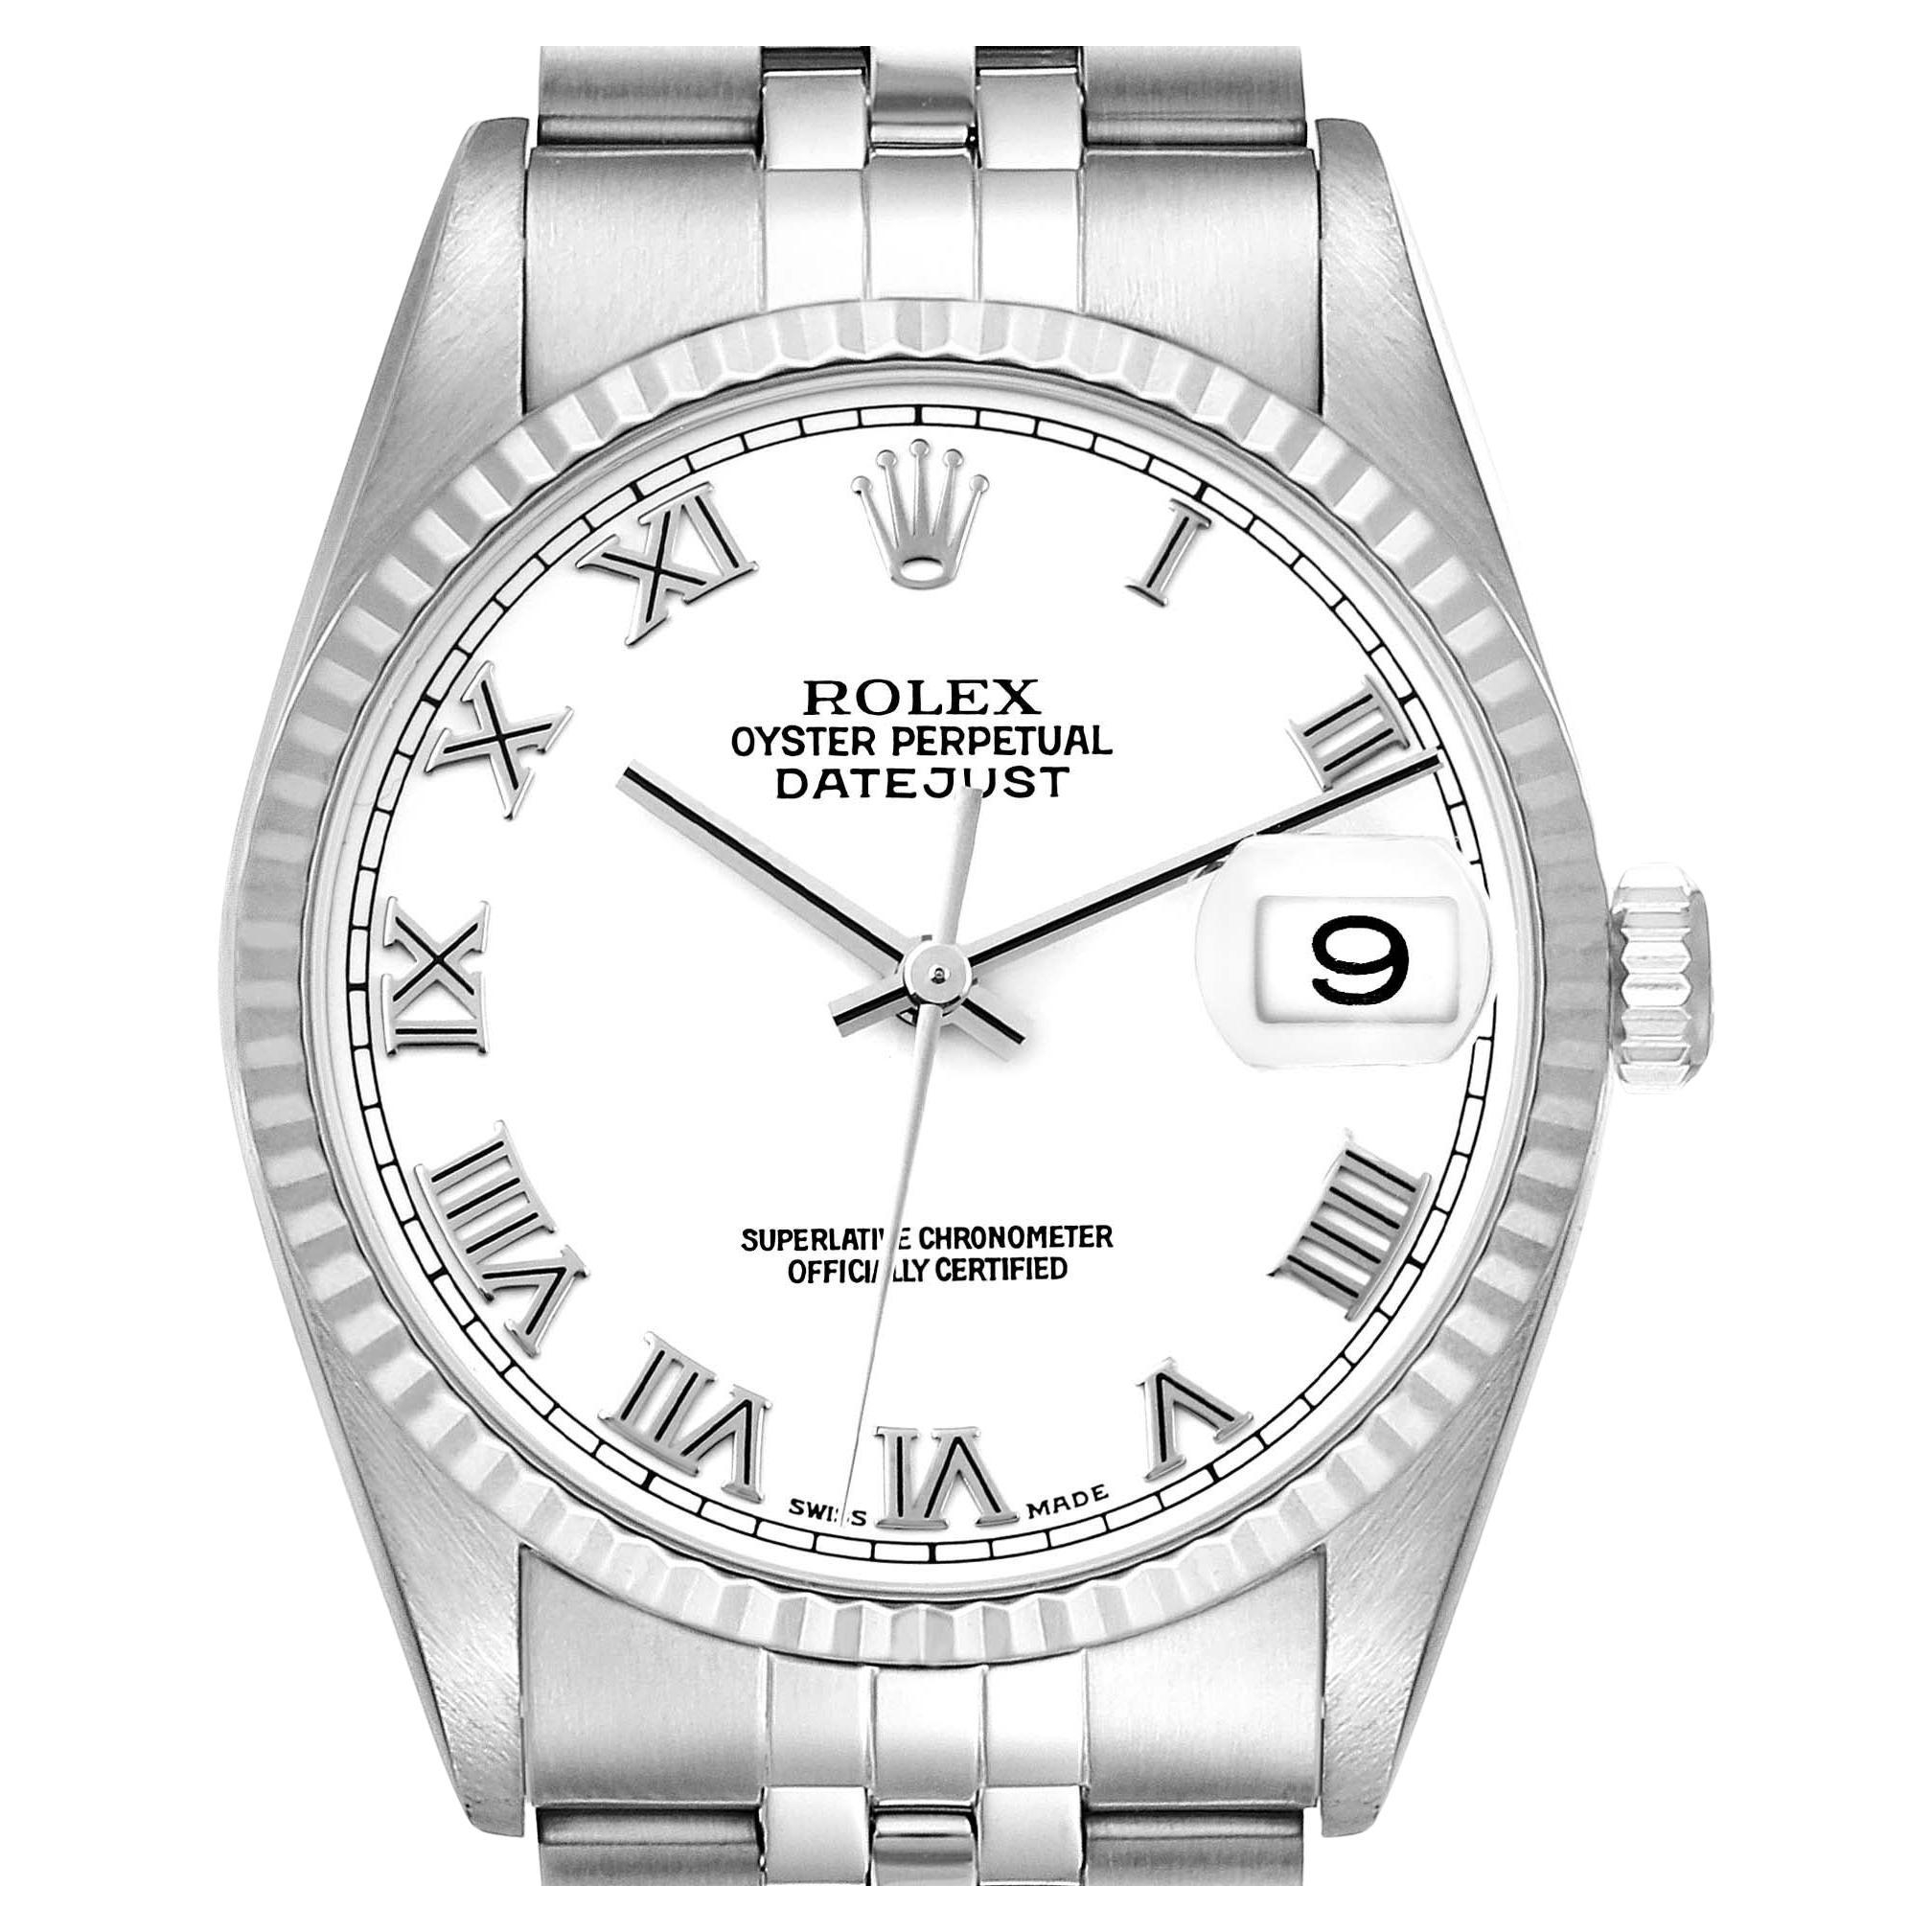 Rolex Datejust Roman Dial Steel White Gold Mens Watch 16234 Box Papers